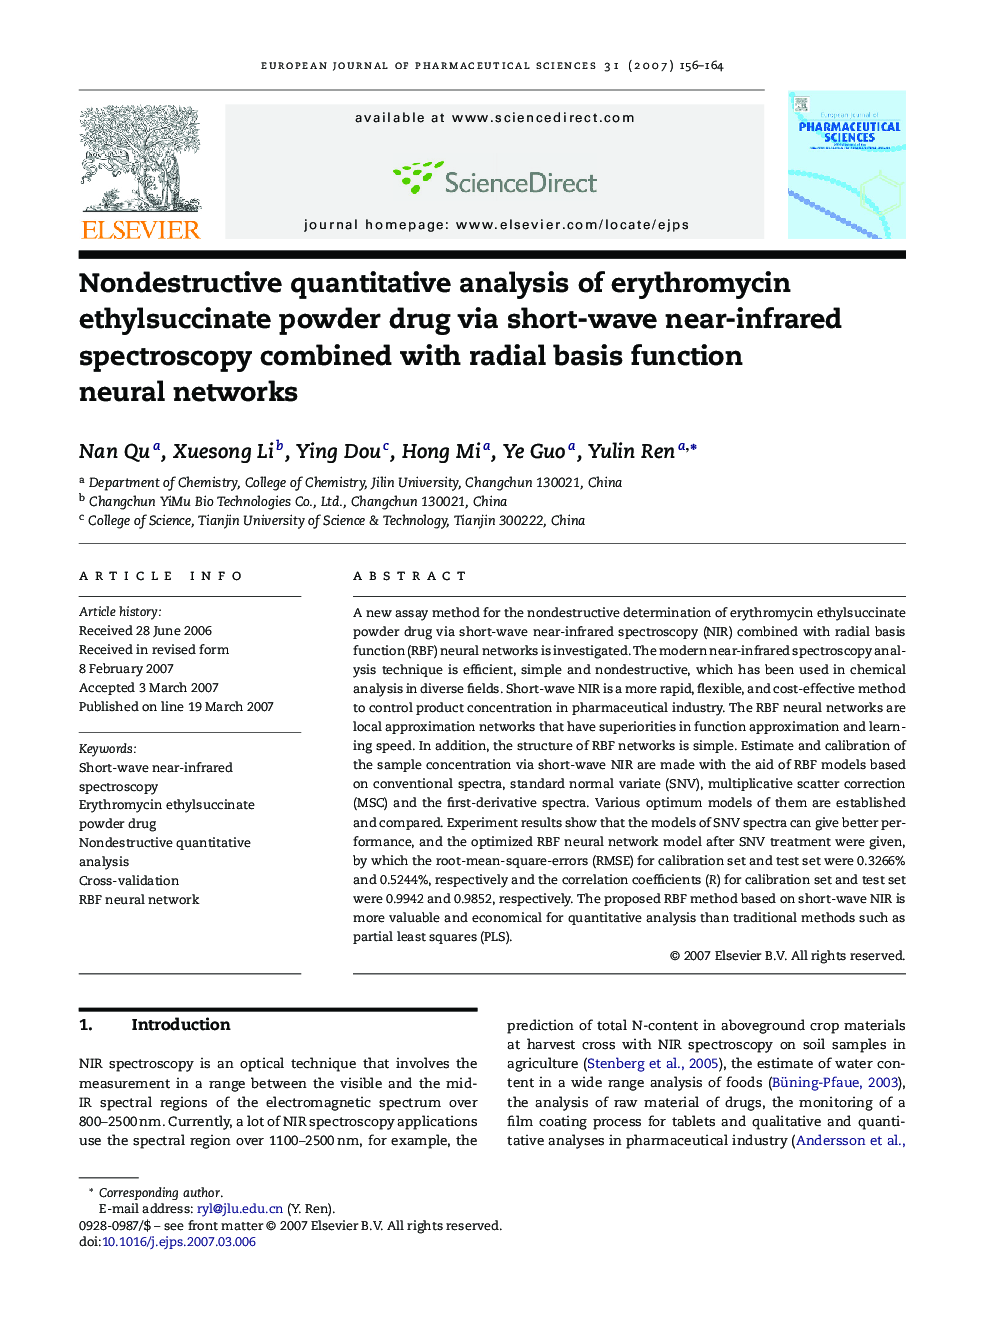 Nondestructive quantitative analysis of erythromycin ethylsuccinate powder drug via short-wave near-infrared spectroscopy combined with radial basis function neural networks